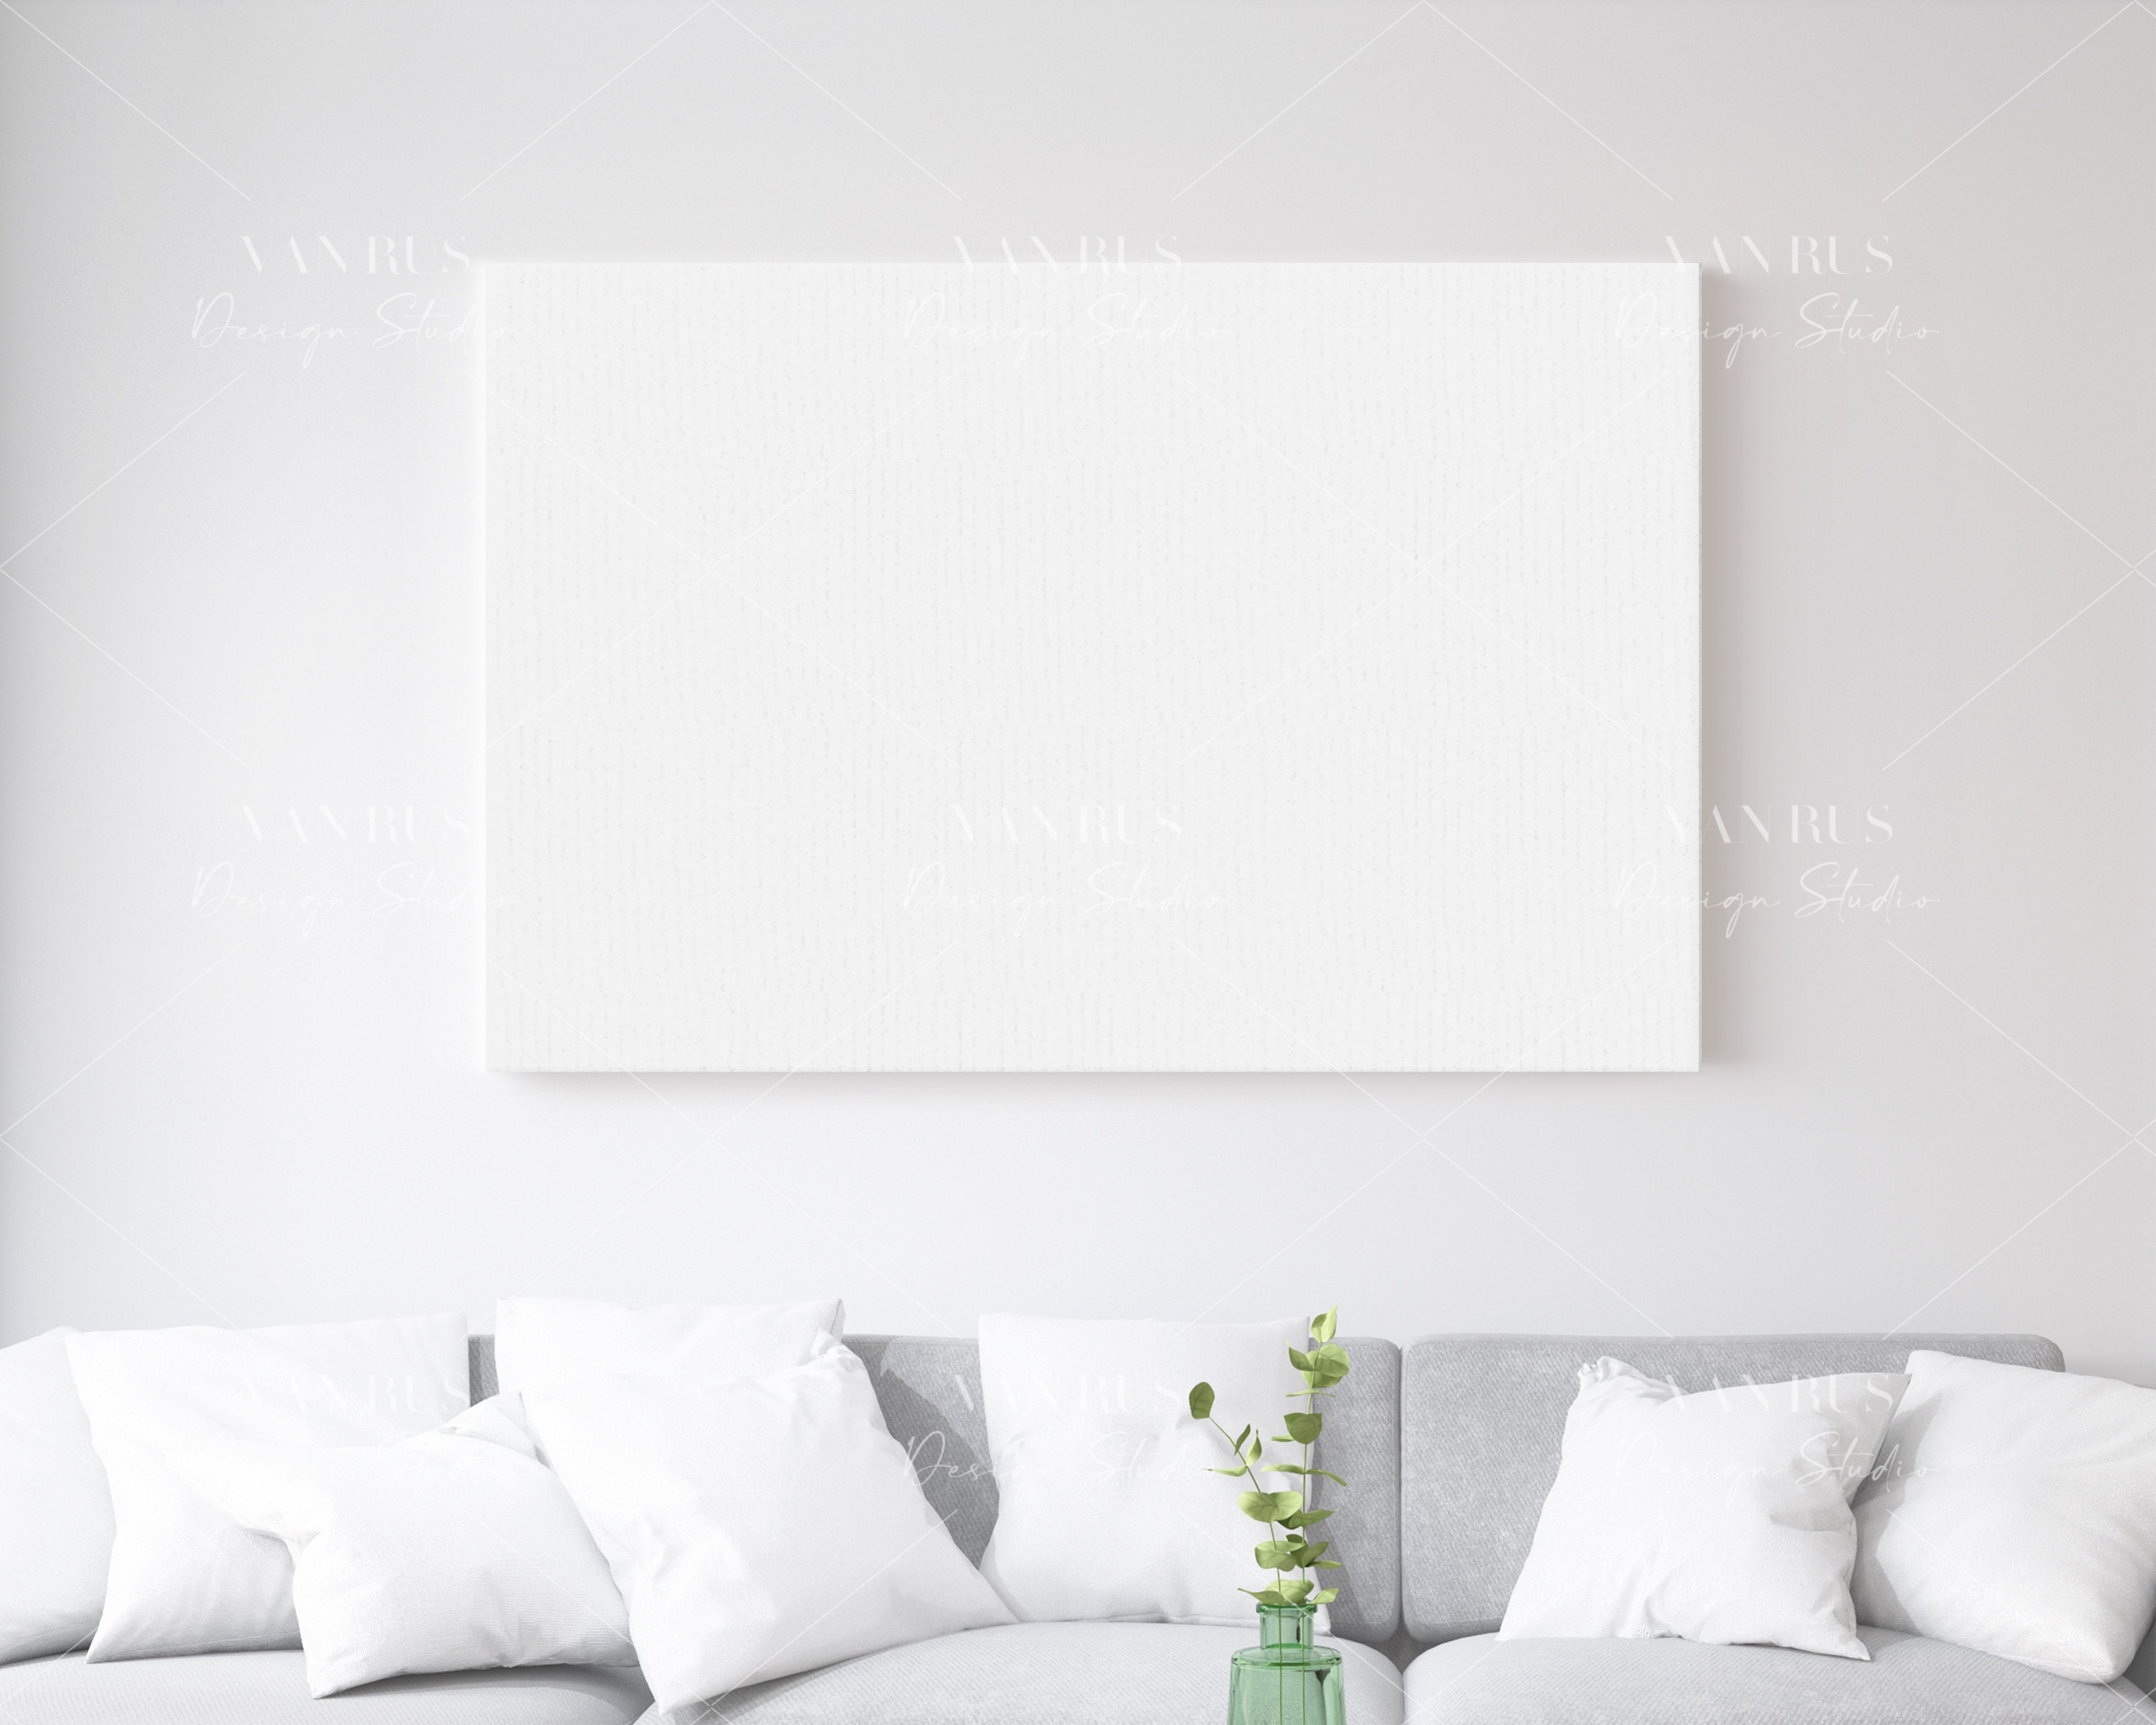 7,960 Square Canvas Mockup Images, Stock Photos, 3D objects